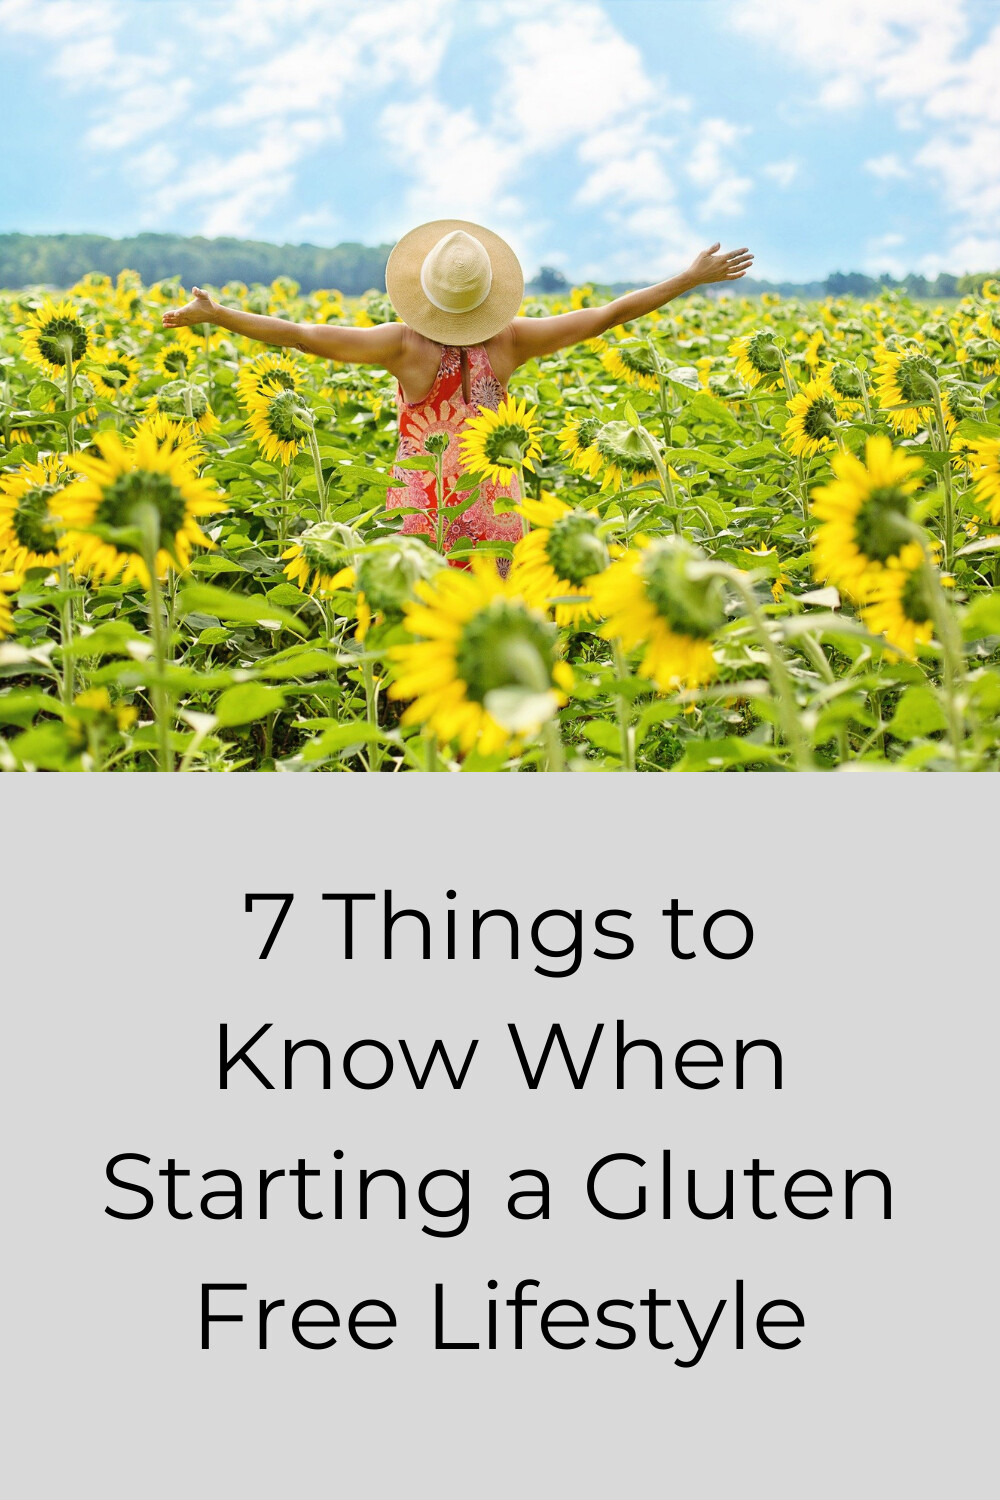 7 Things to Know When Starting a Gluten Free Lifestyle